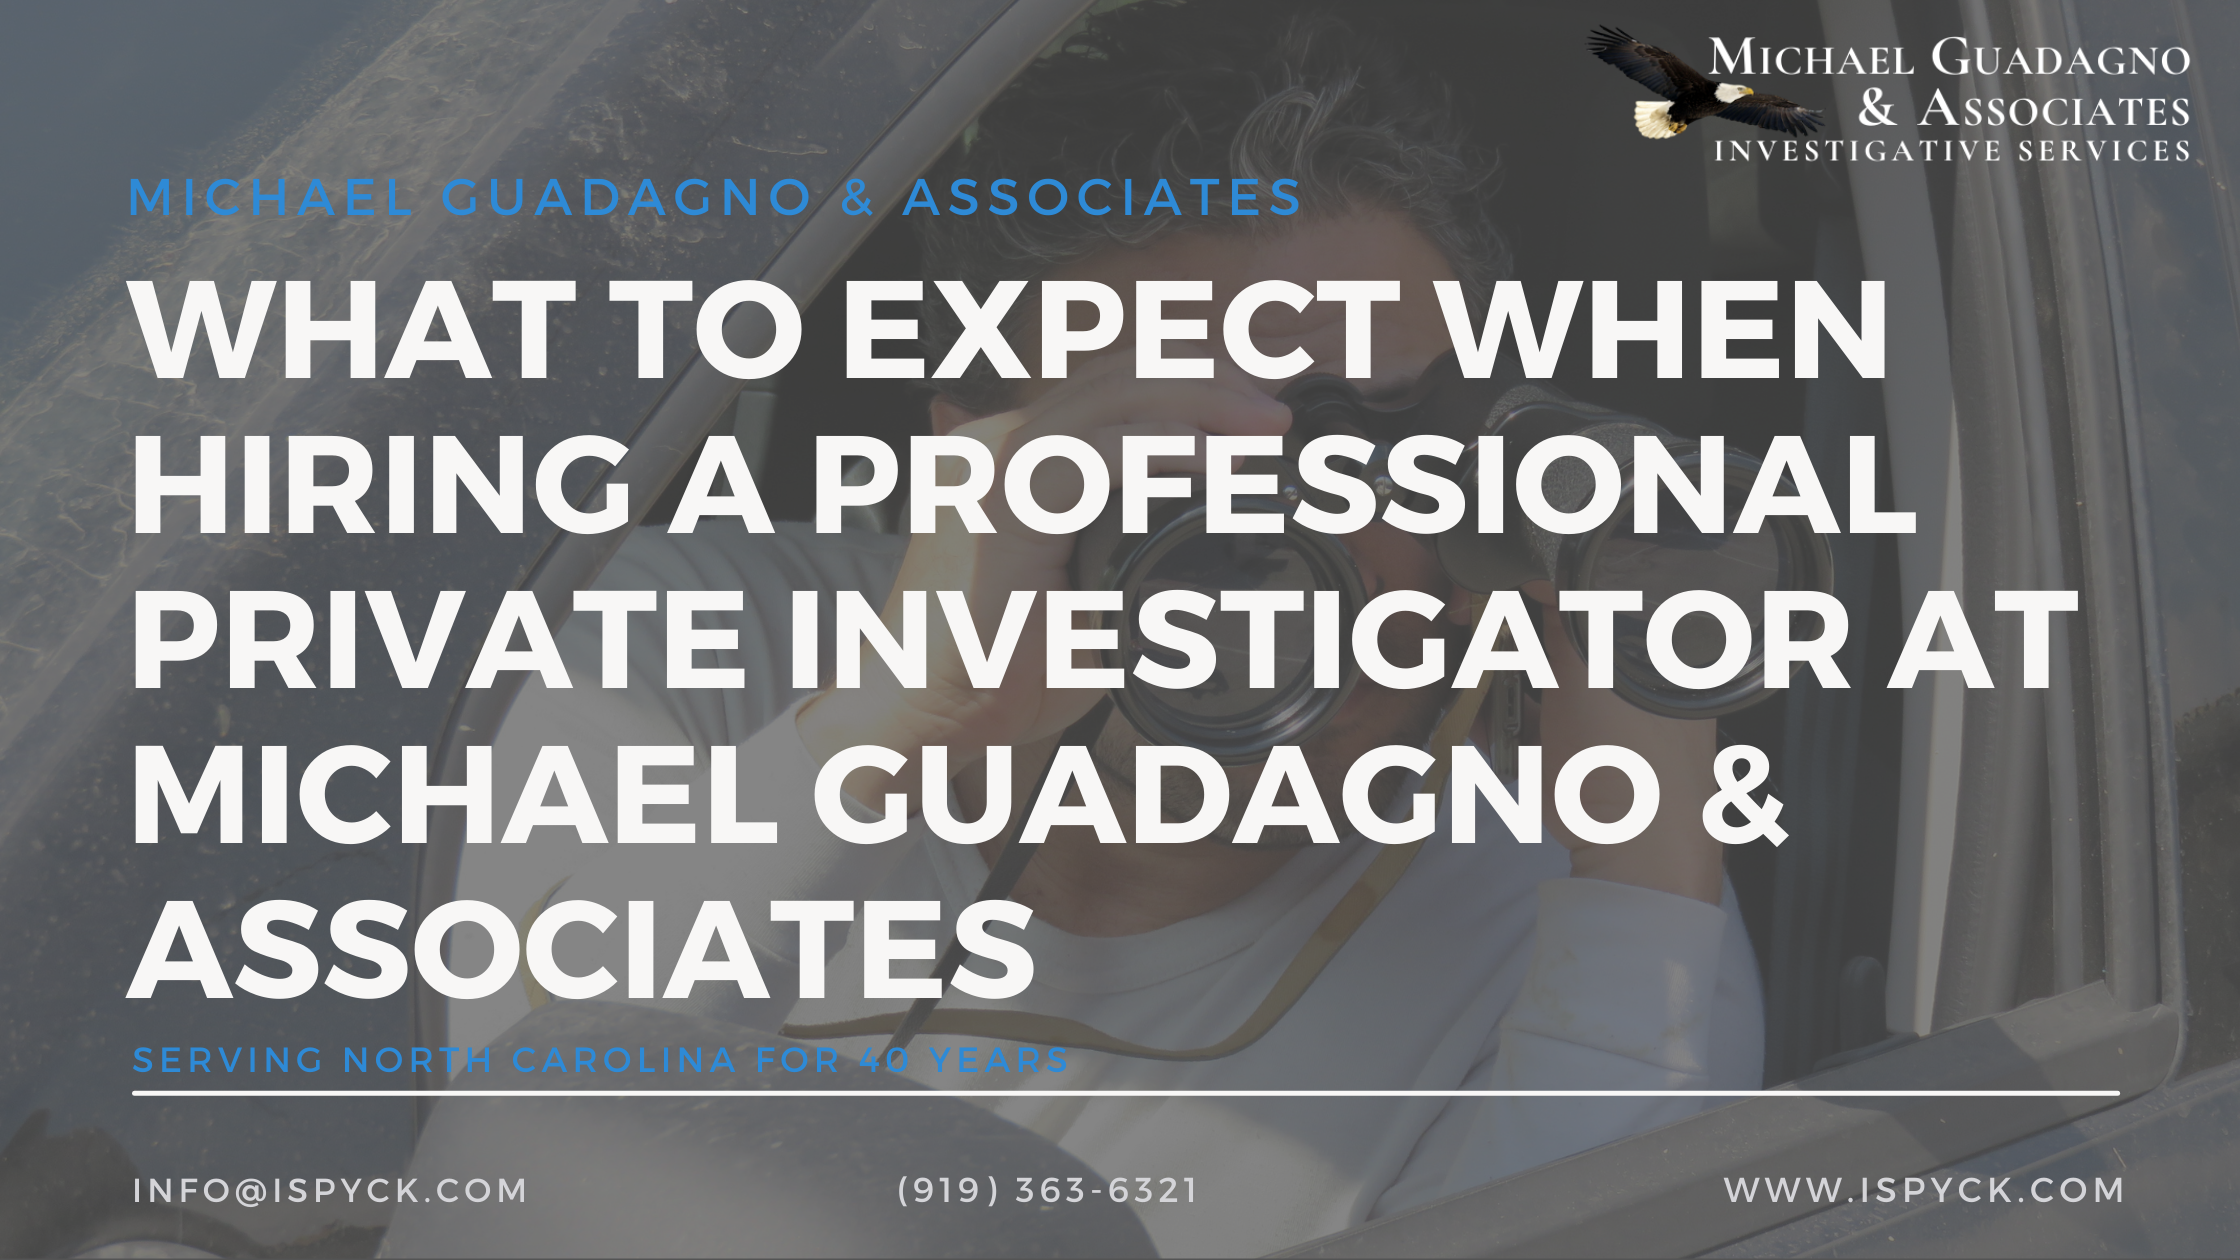 What to Expect When Hiring a Professional Private Investigator at Michael Guadagno & Associates